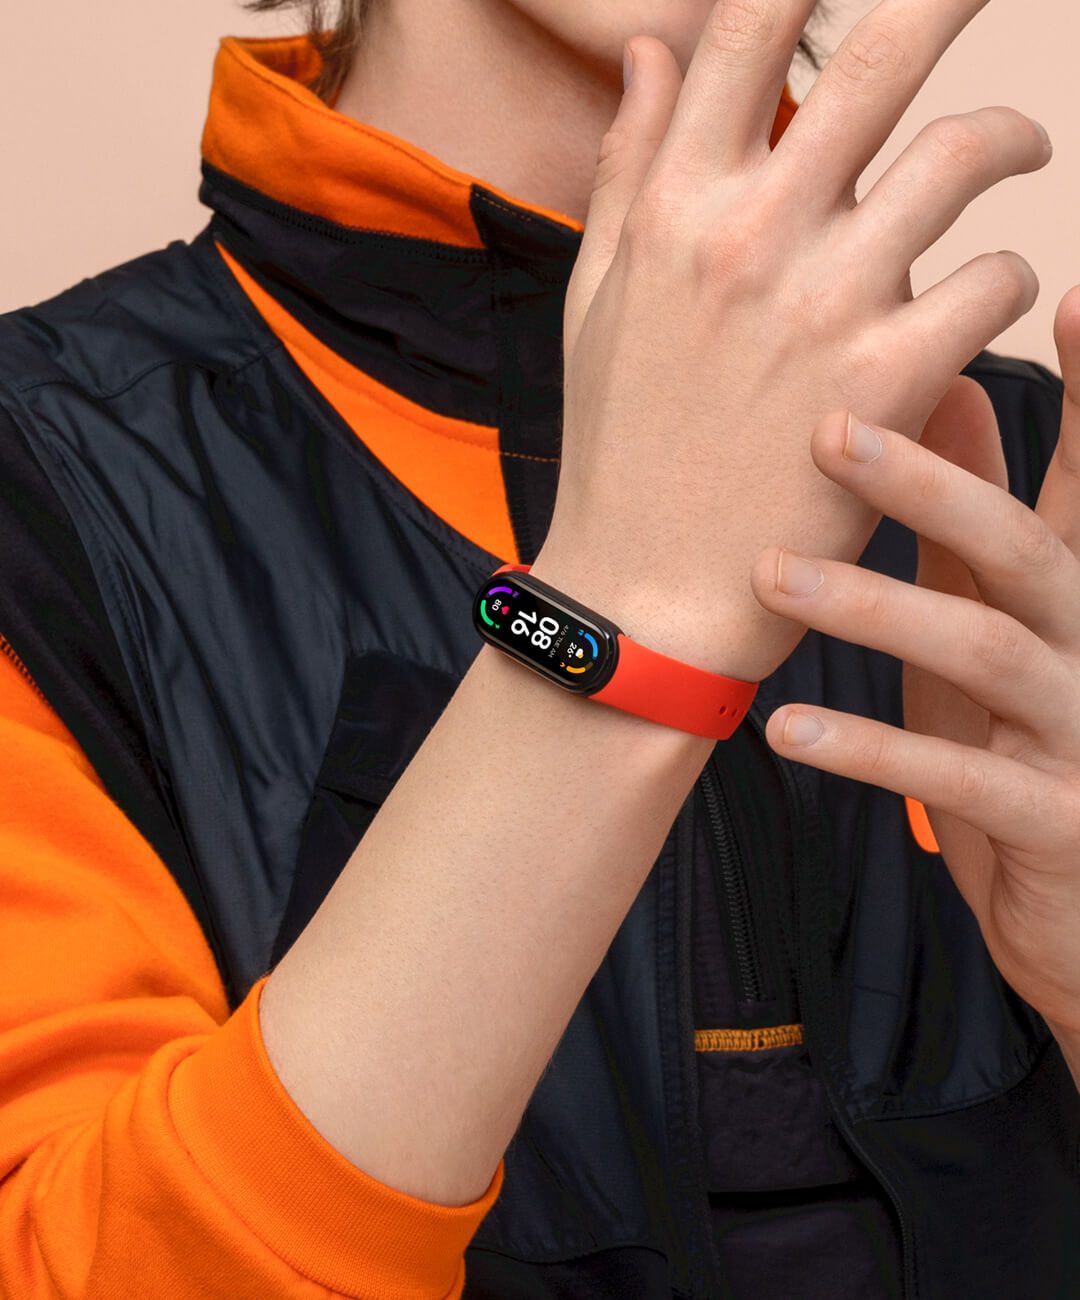 Mi Smart Band 6 - No.1 Band Brand in the World - Xiaomi Global Official